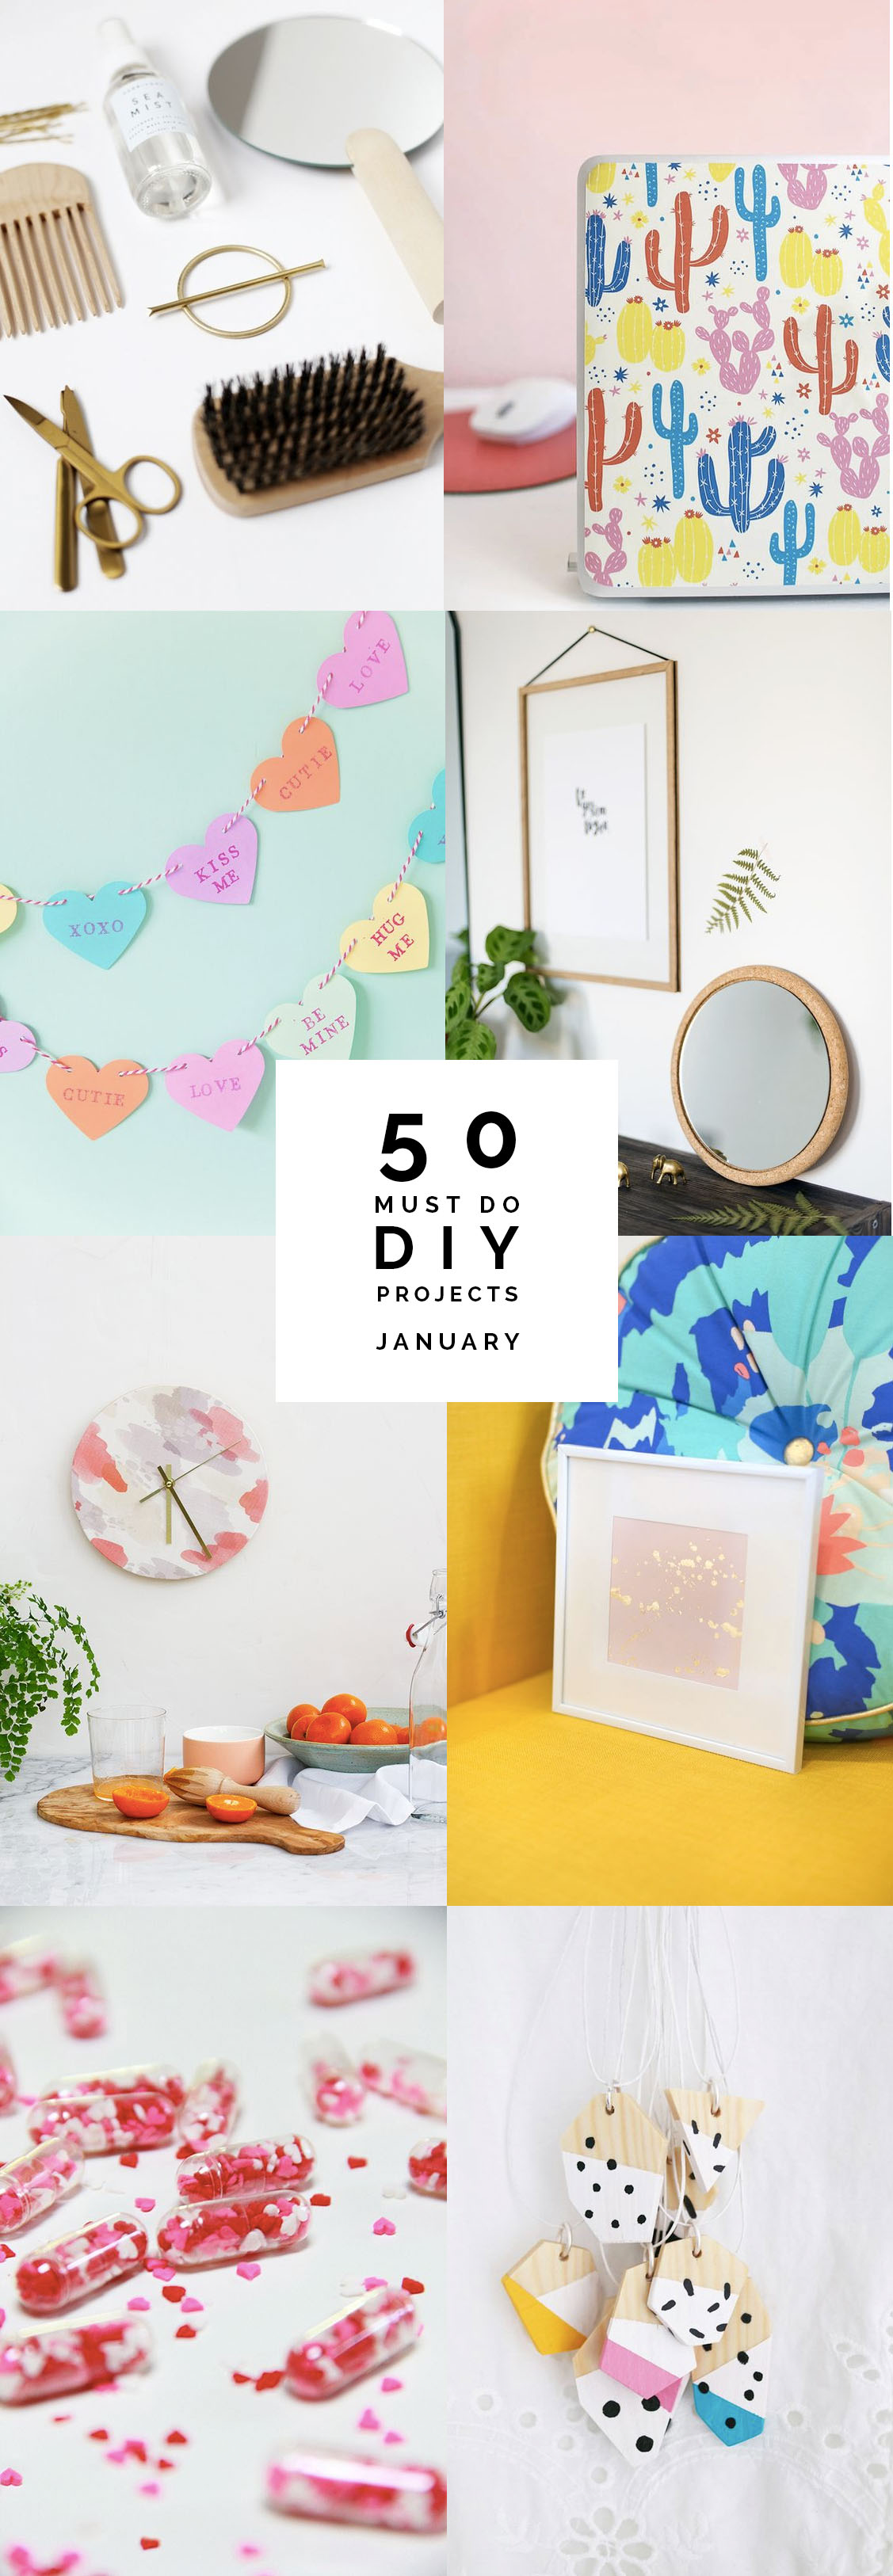 50 Must Do DIY's for January Round Up